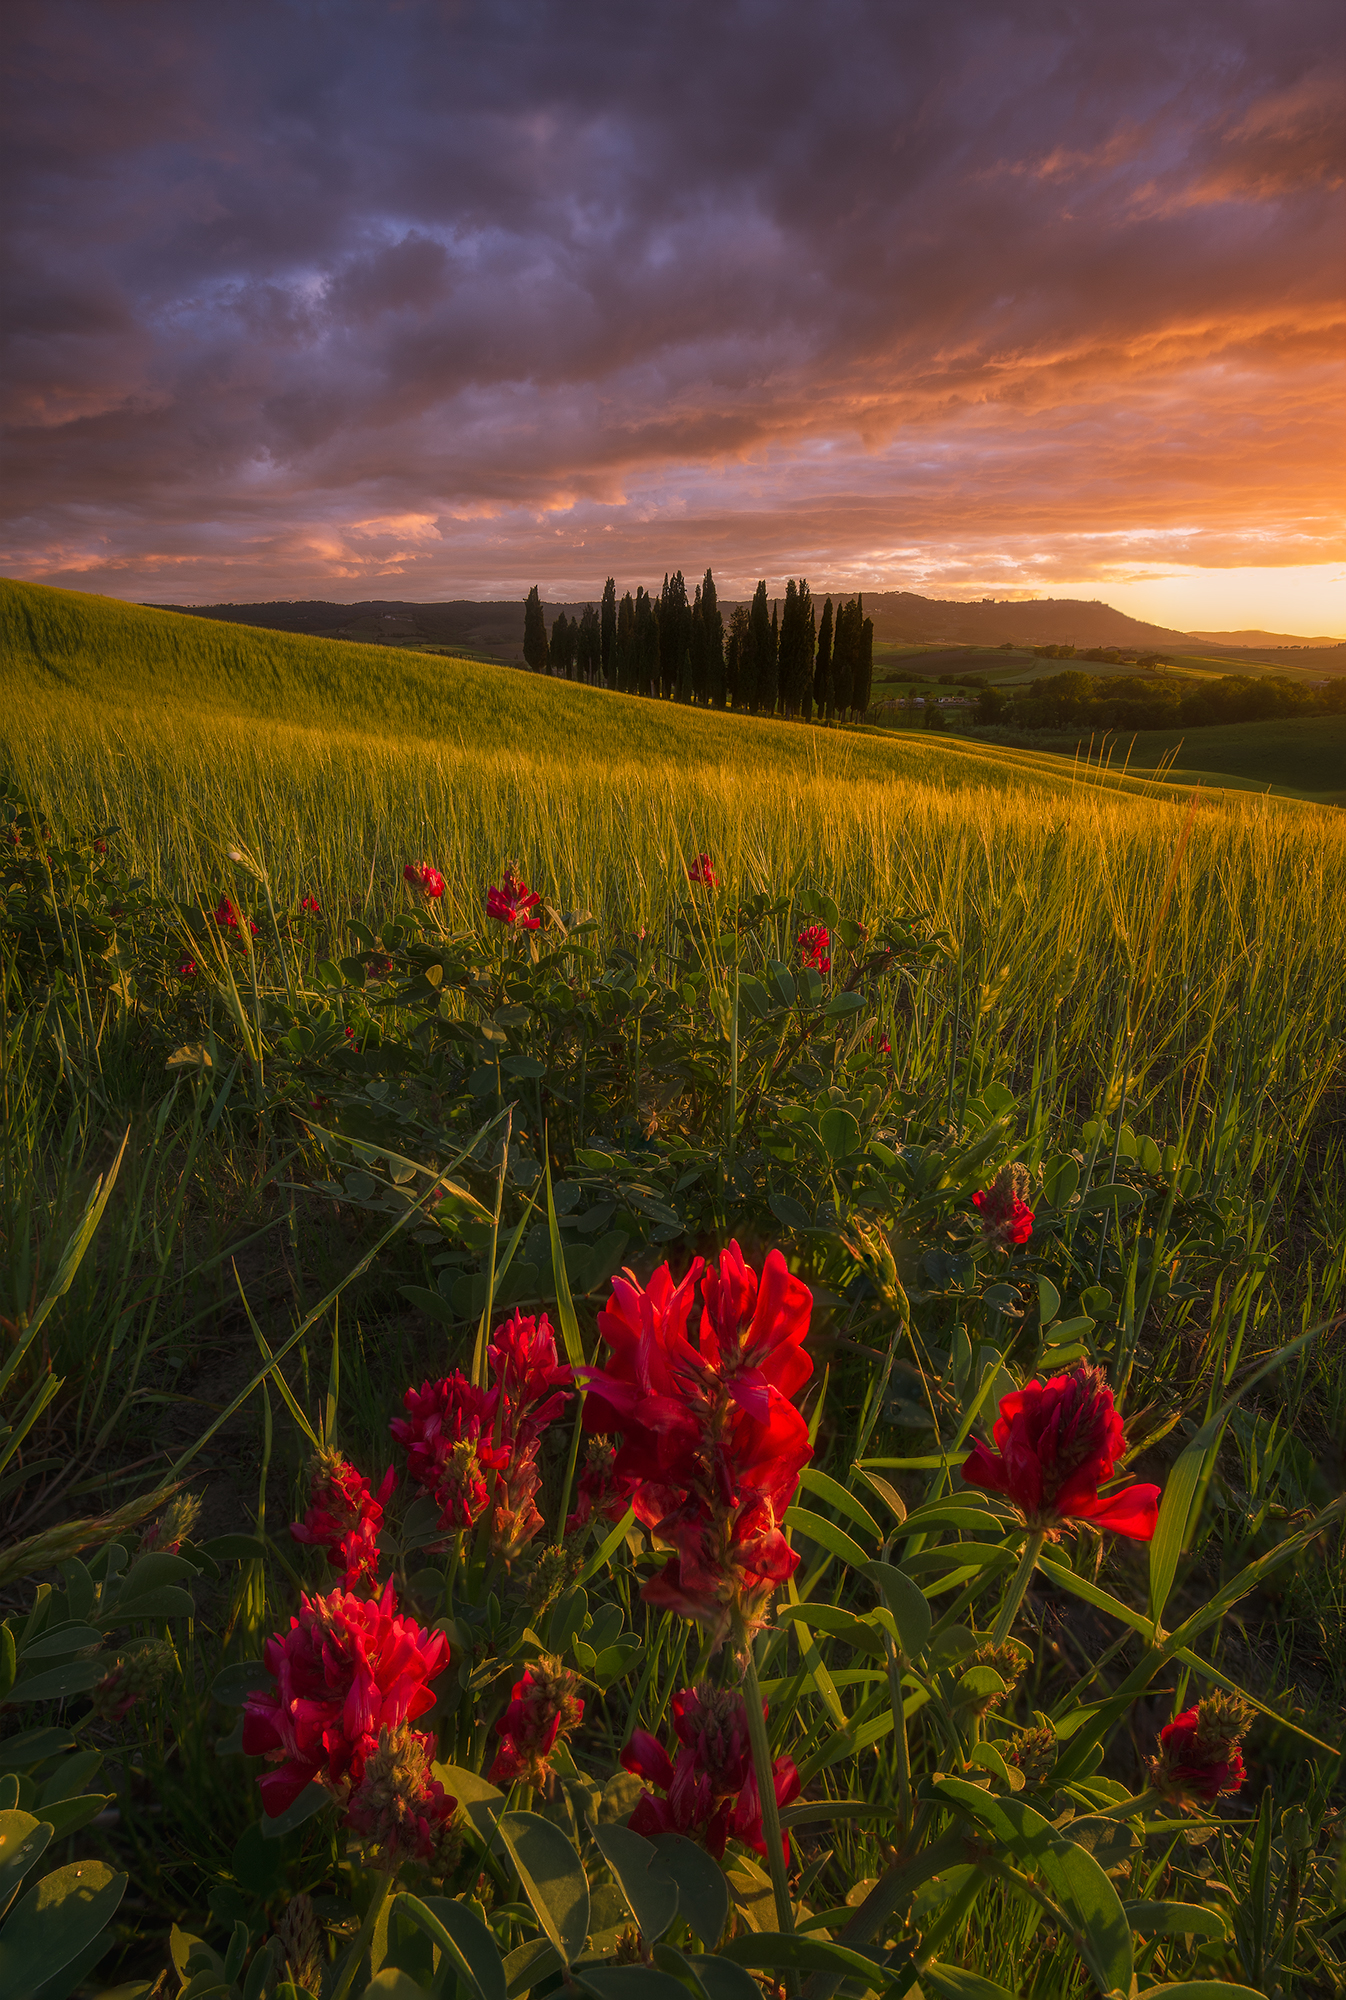 The Tuscan Spring...